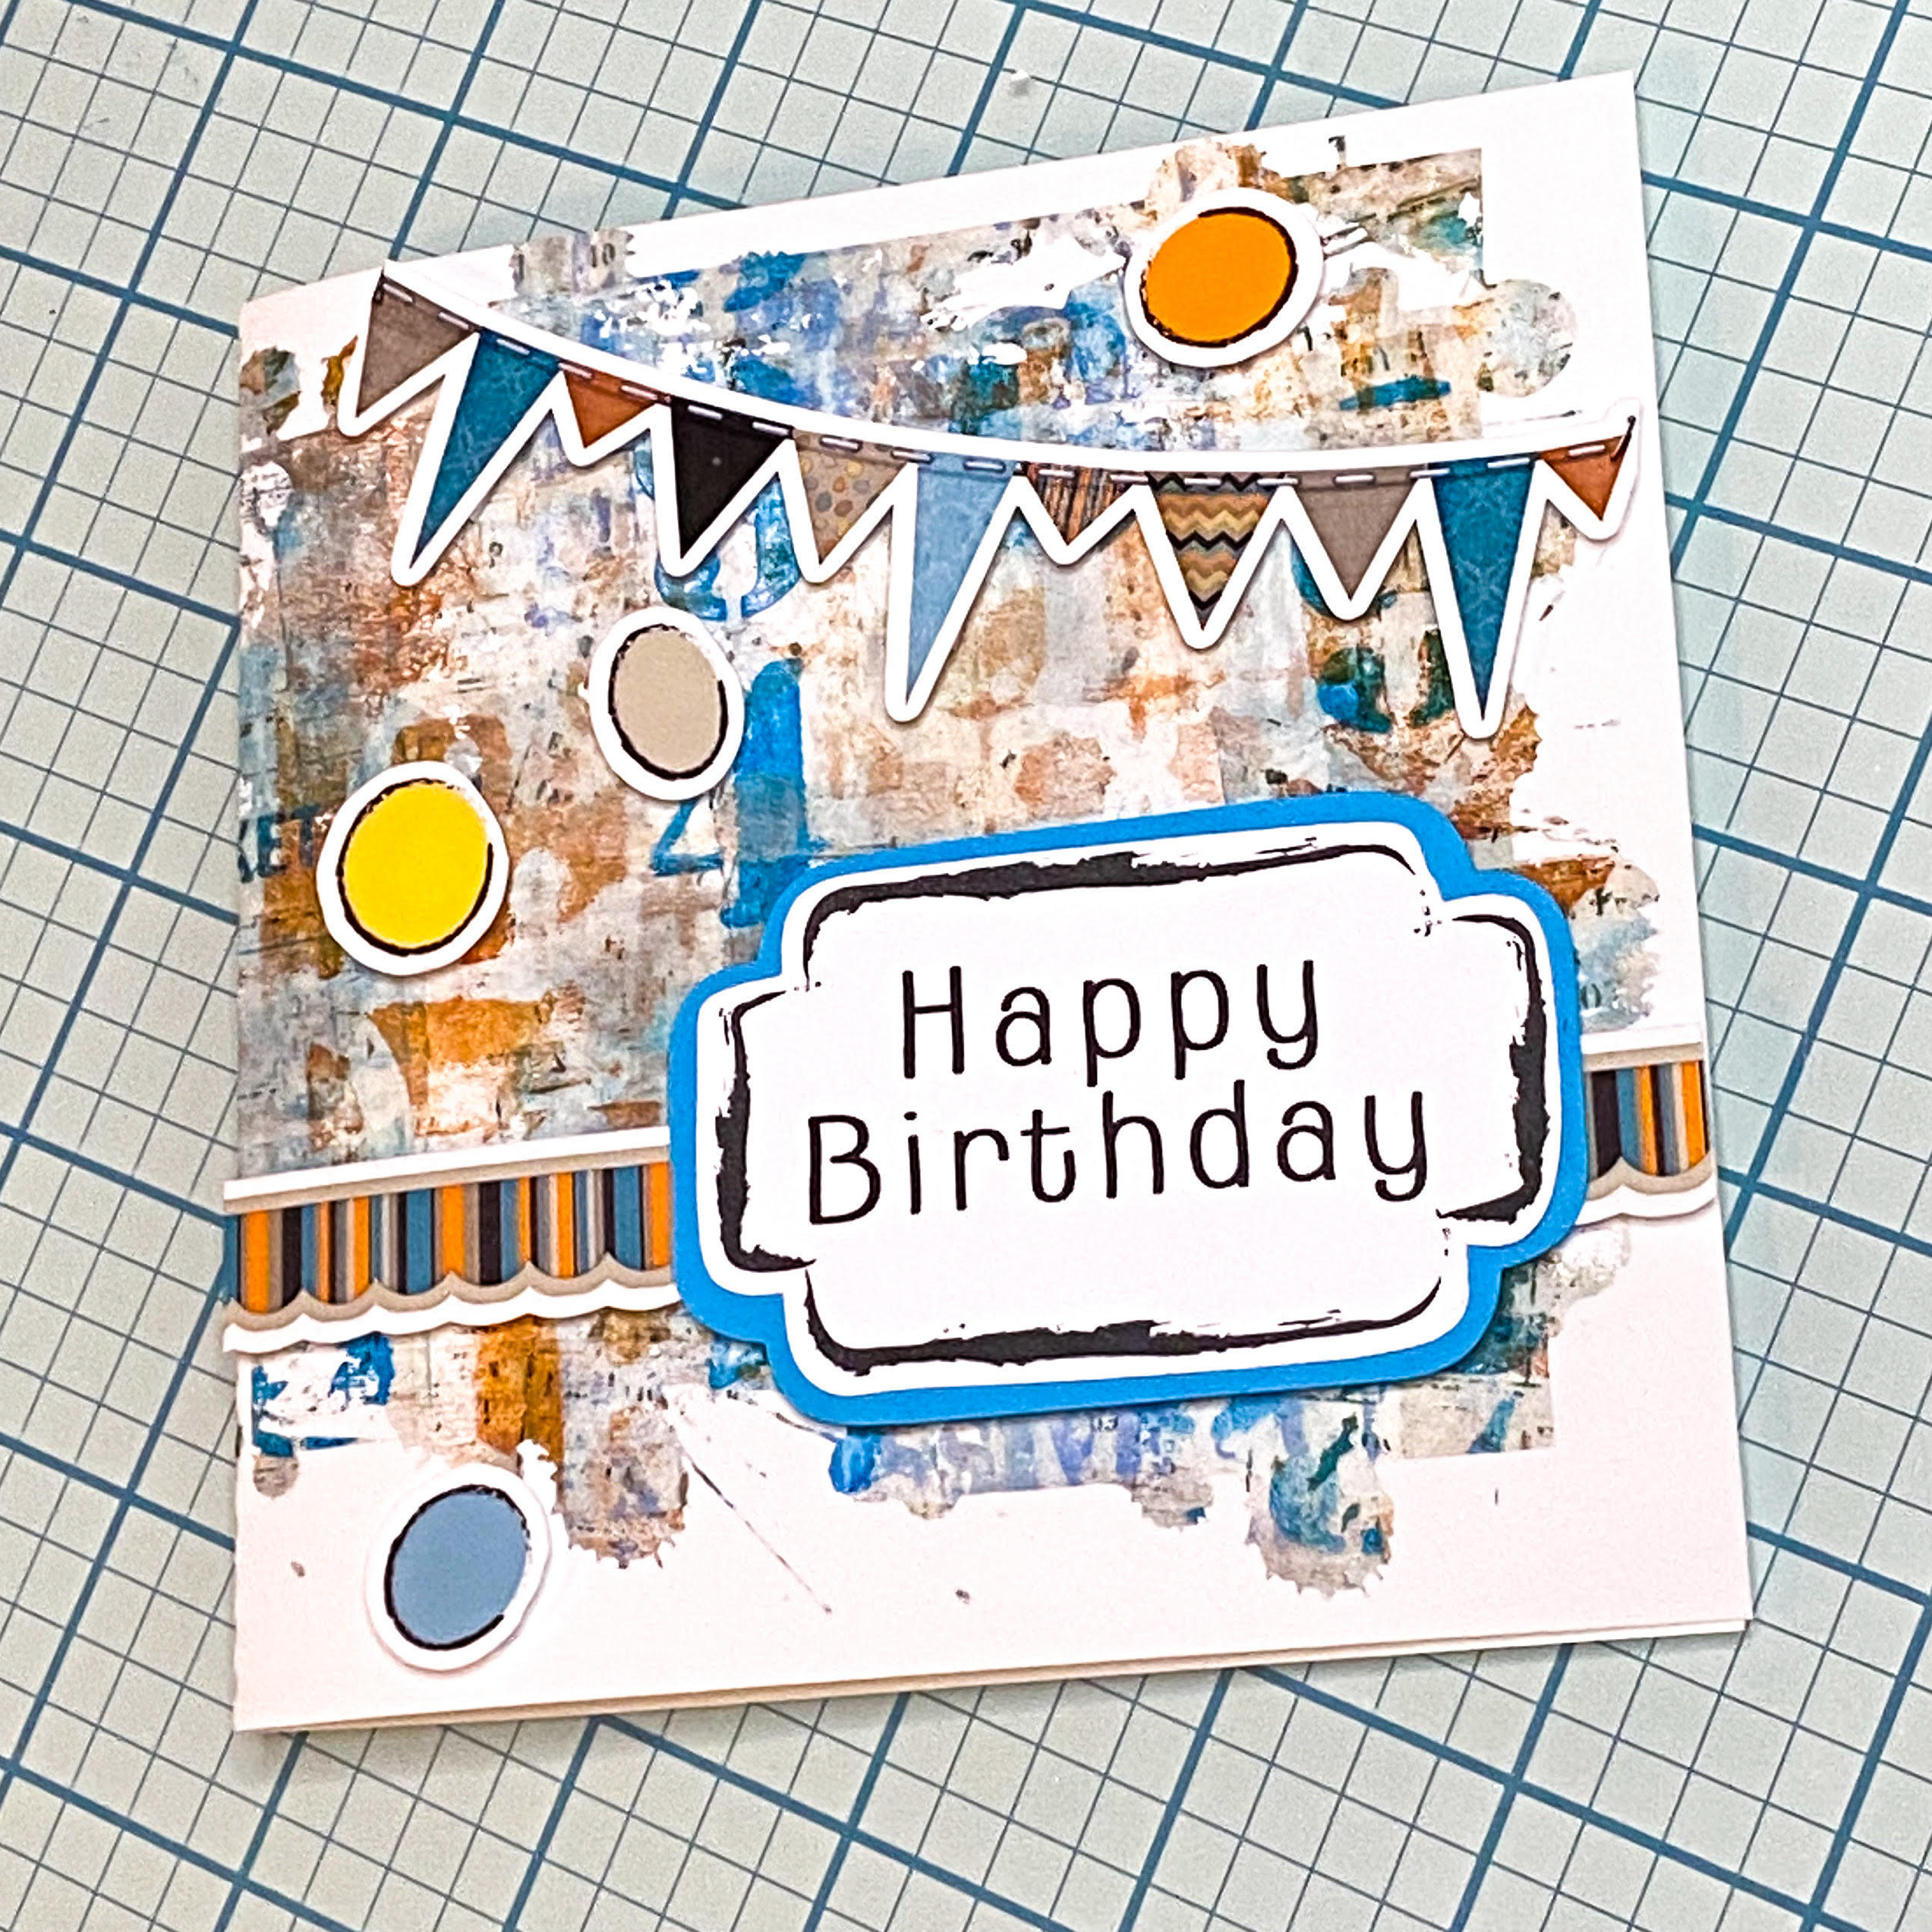 Birthday Card using Dreaming Elements Grunge Background and Birthday Sentiment